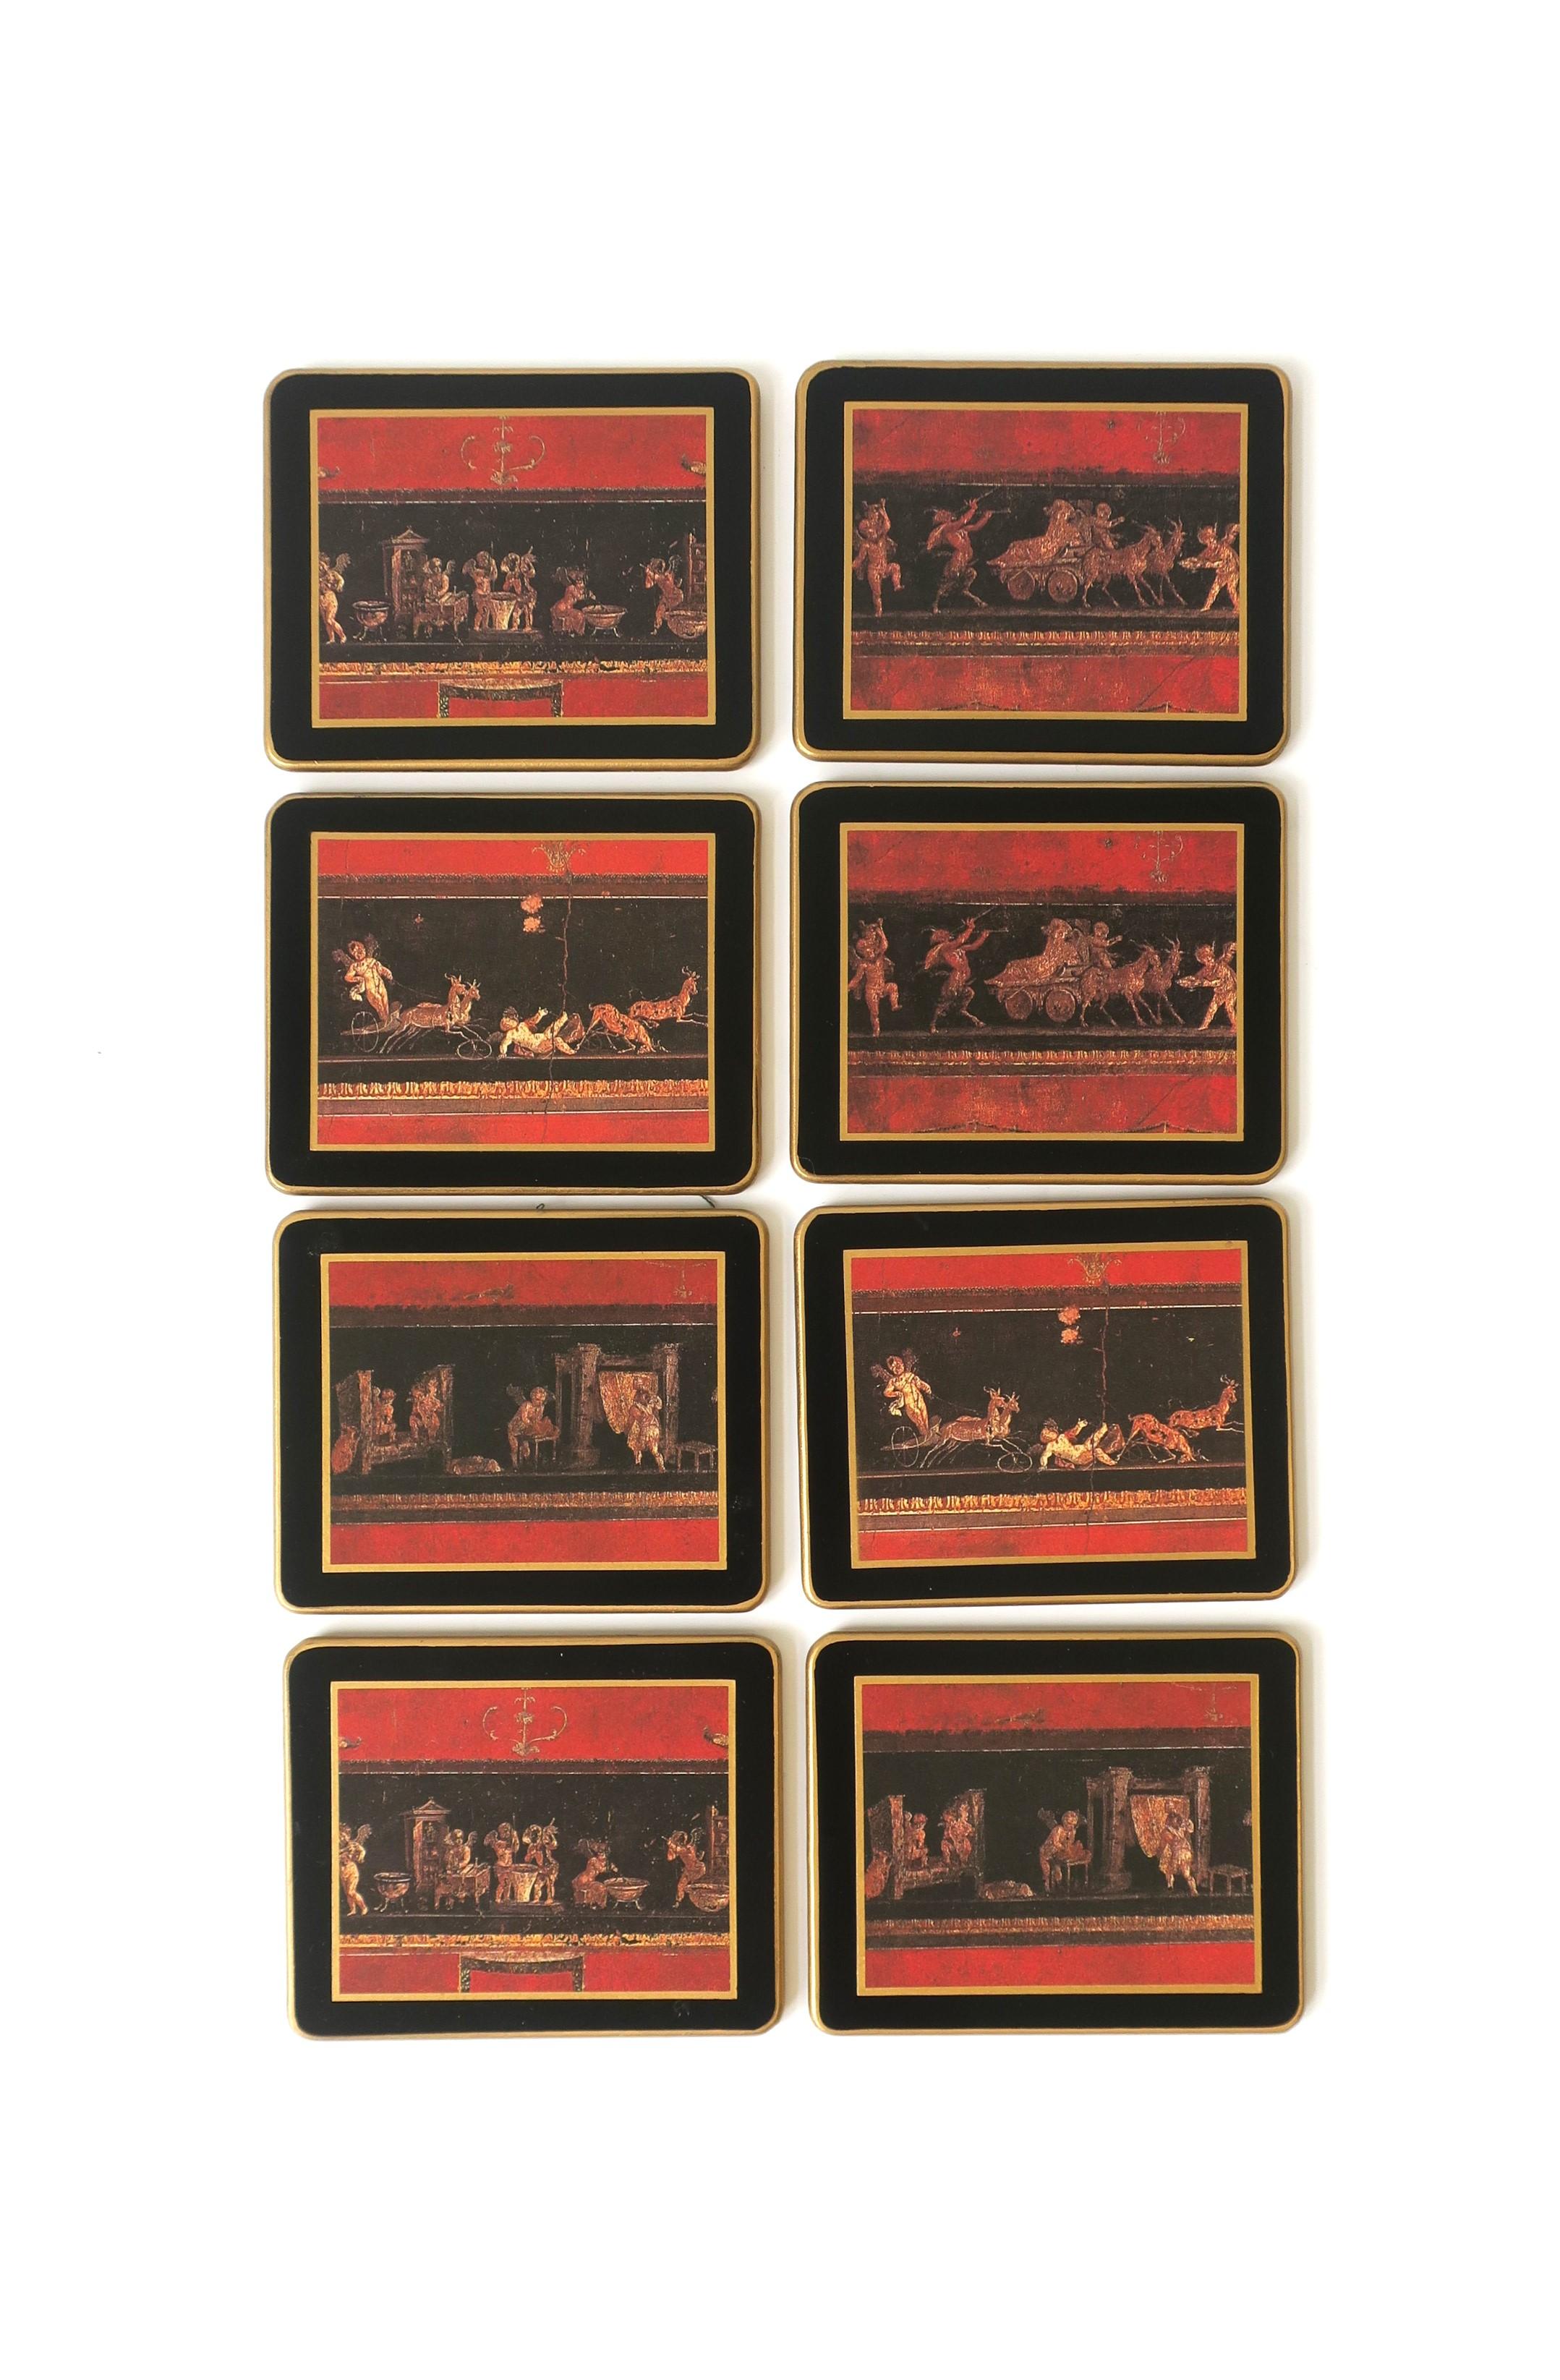 A set of eight (8) black, red, and gold Champagne, wine, cocktails, etc., coasters from English luxury brand Asprey & Company in the Neoclassical-Renisance design style, circa mid to late-20th century, England. A great set for entertaining and a